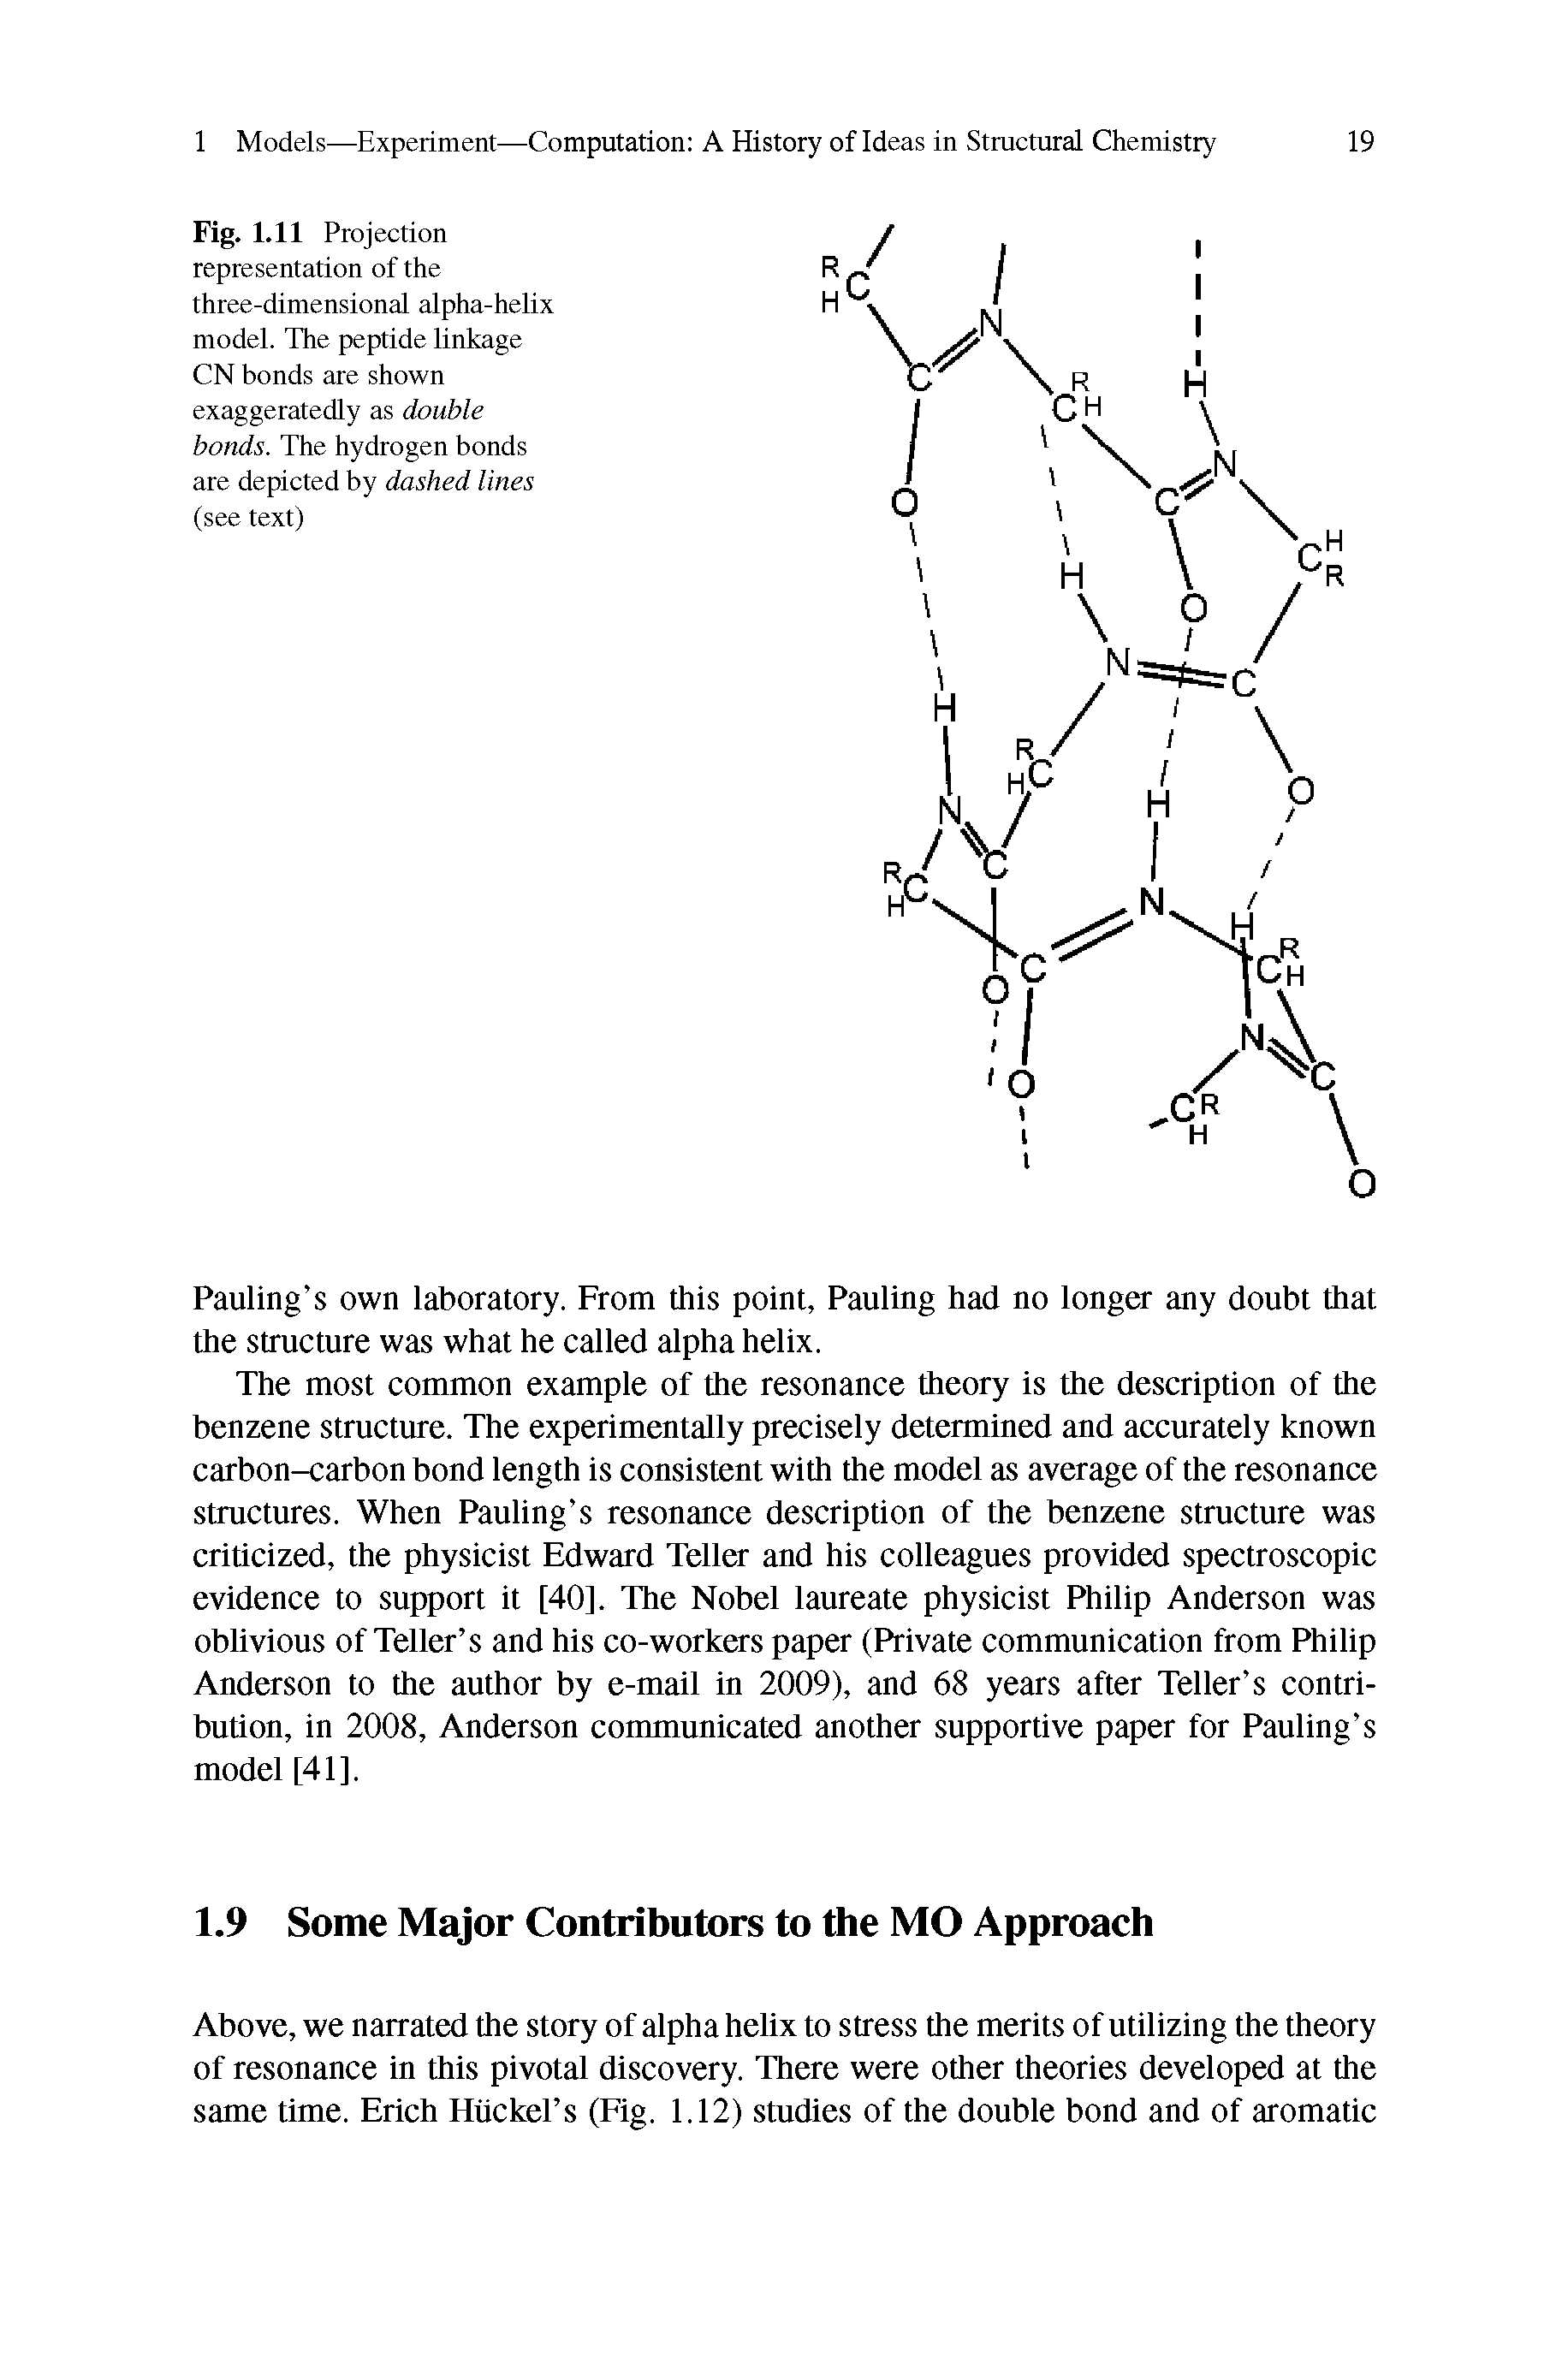 Fig. 1.11 Projection representation of the three-dimensional alpha-helix model. The peptide linkage CN bonds are shown exaggeratedly as double bonds. The hydrogen bonds are depicted by dashed lines (see text)...